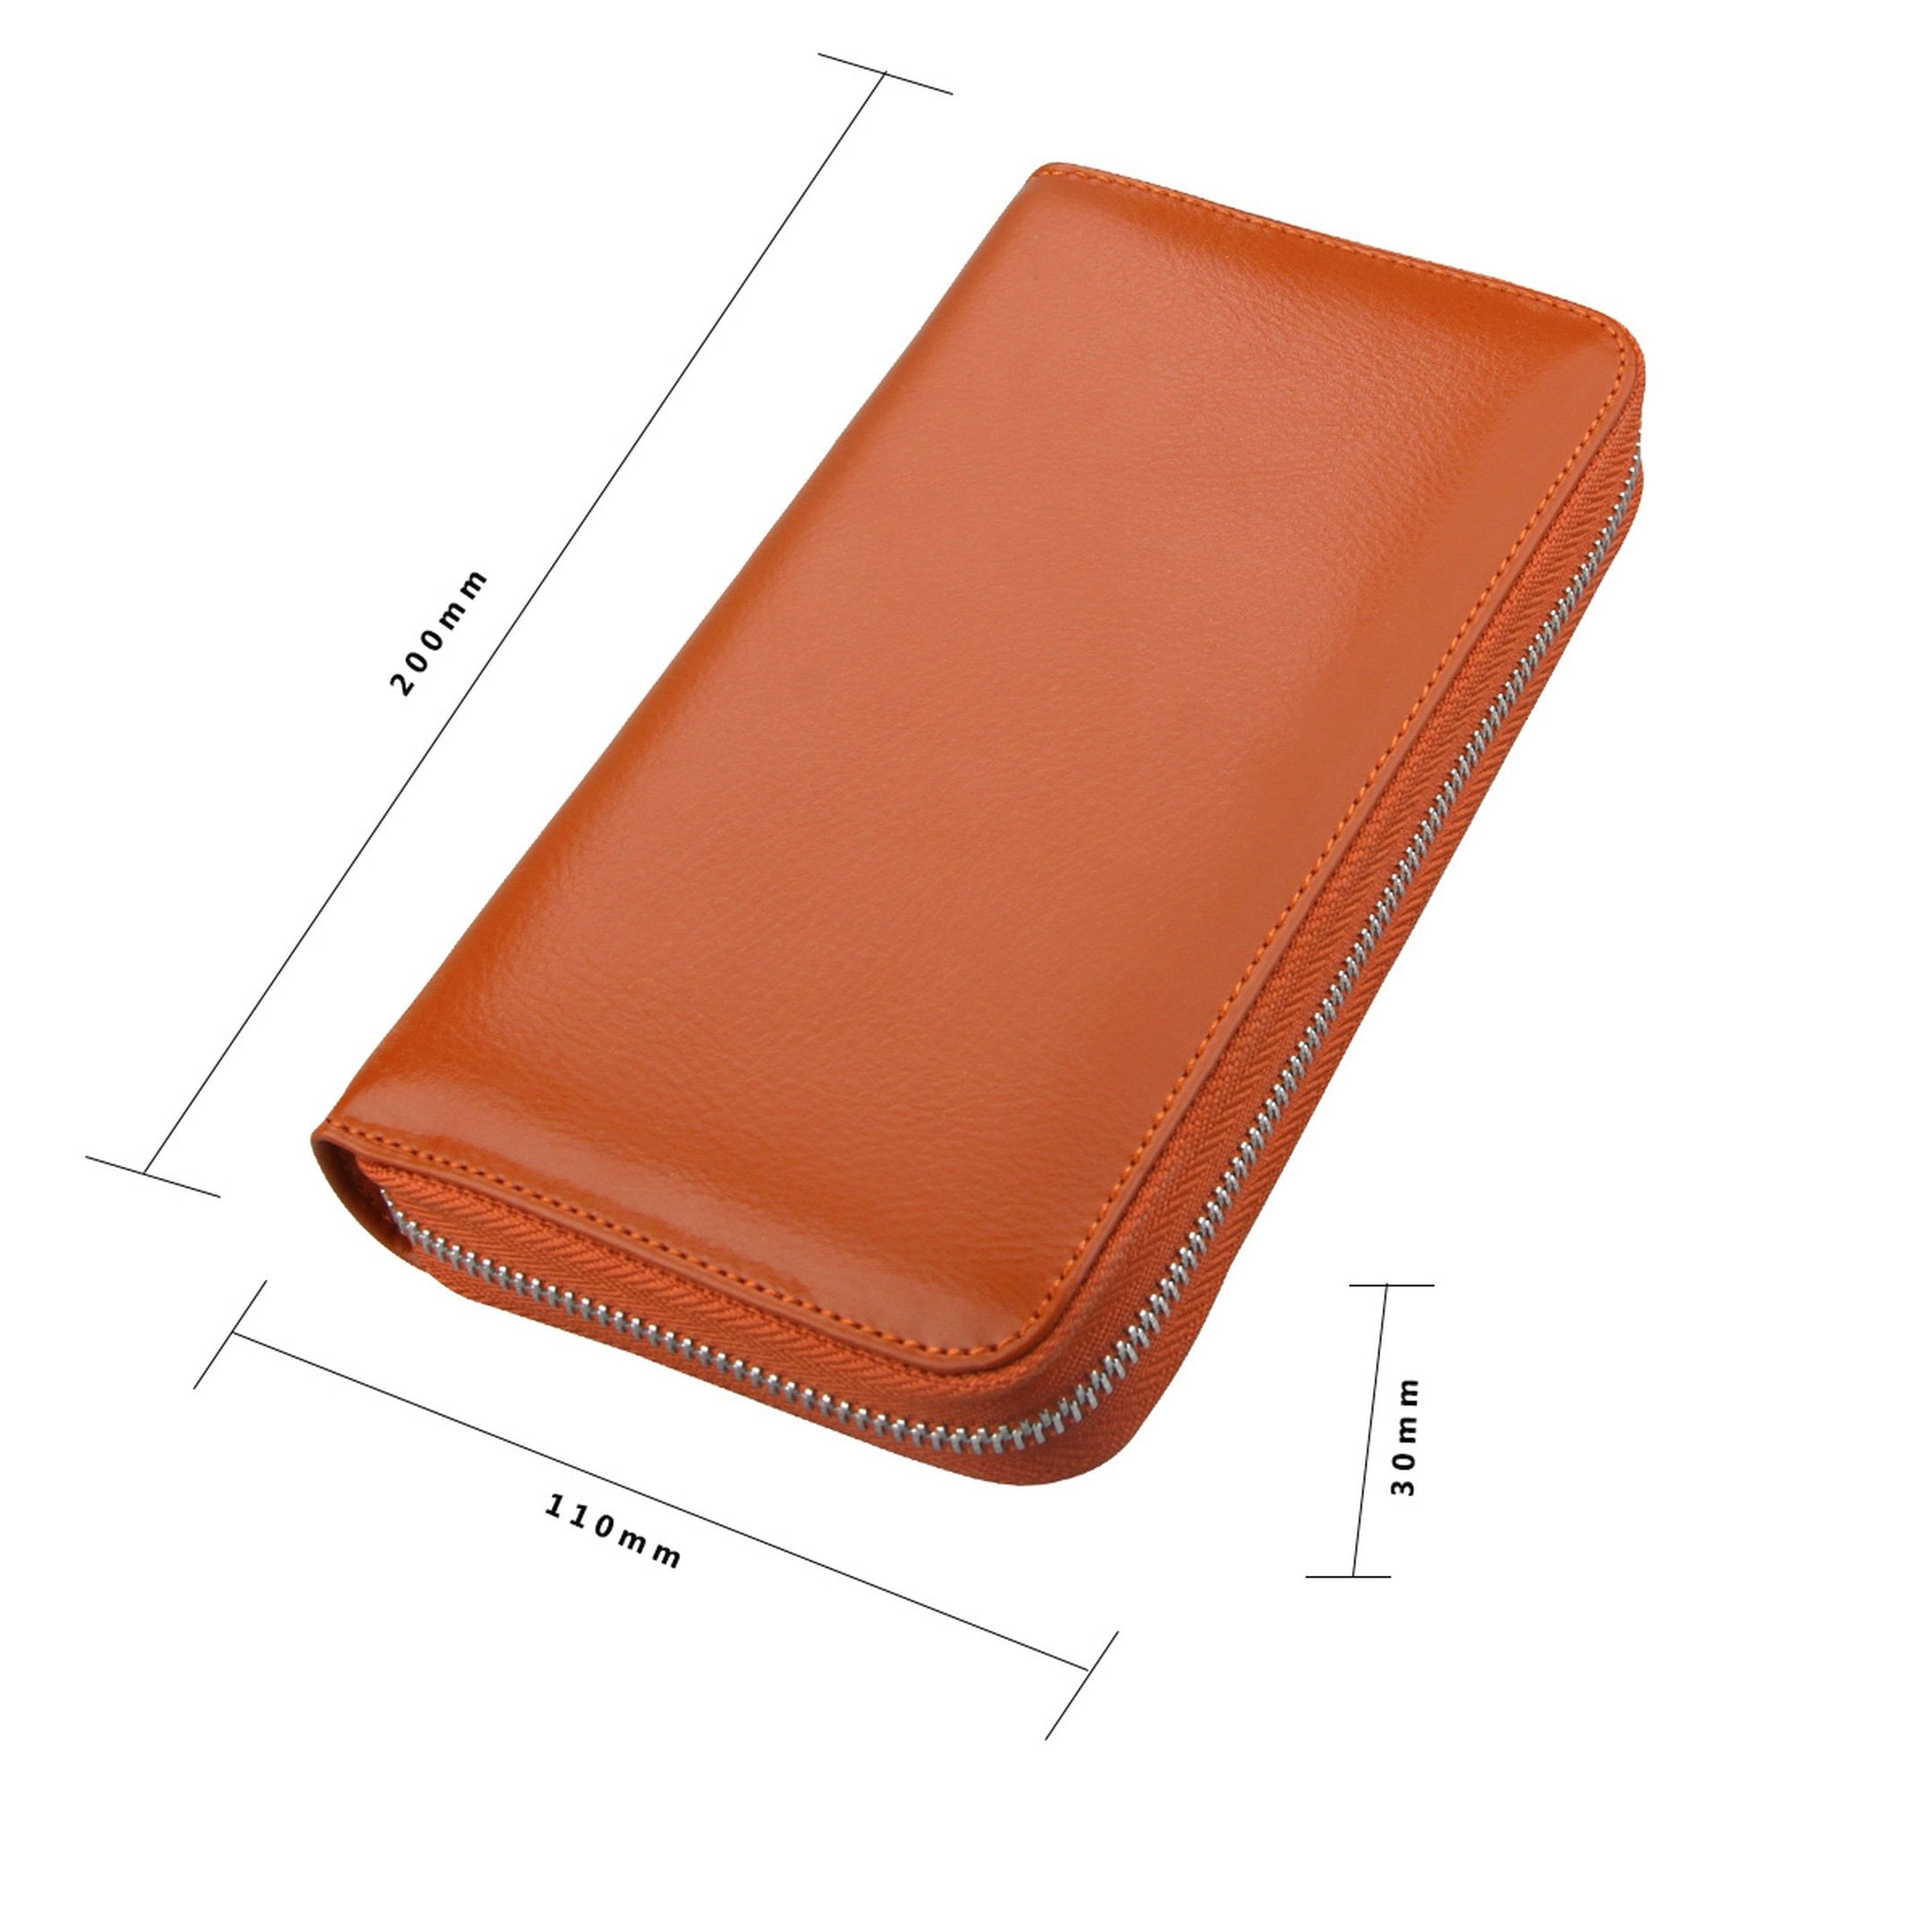 Seamless Orange Peaches with Green Leaves Fruits Grey Credit Card Coin  wallet, RFID Blocking Compact Women Leather Card Holder, Key Change  Organizer